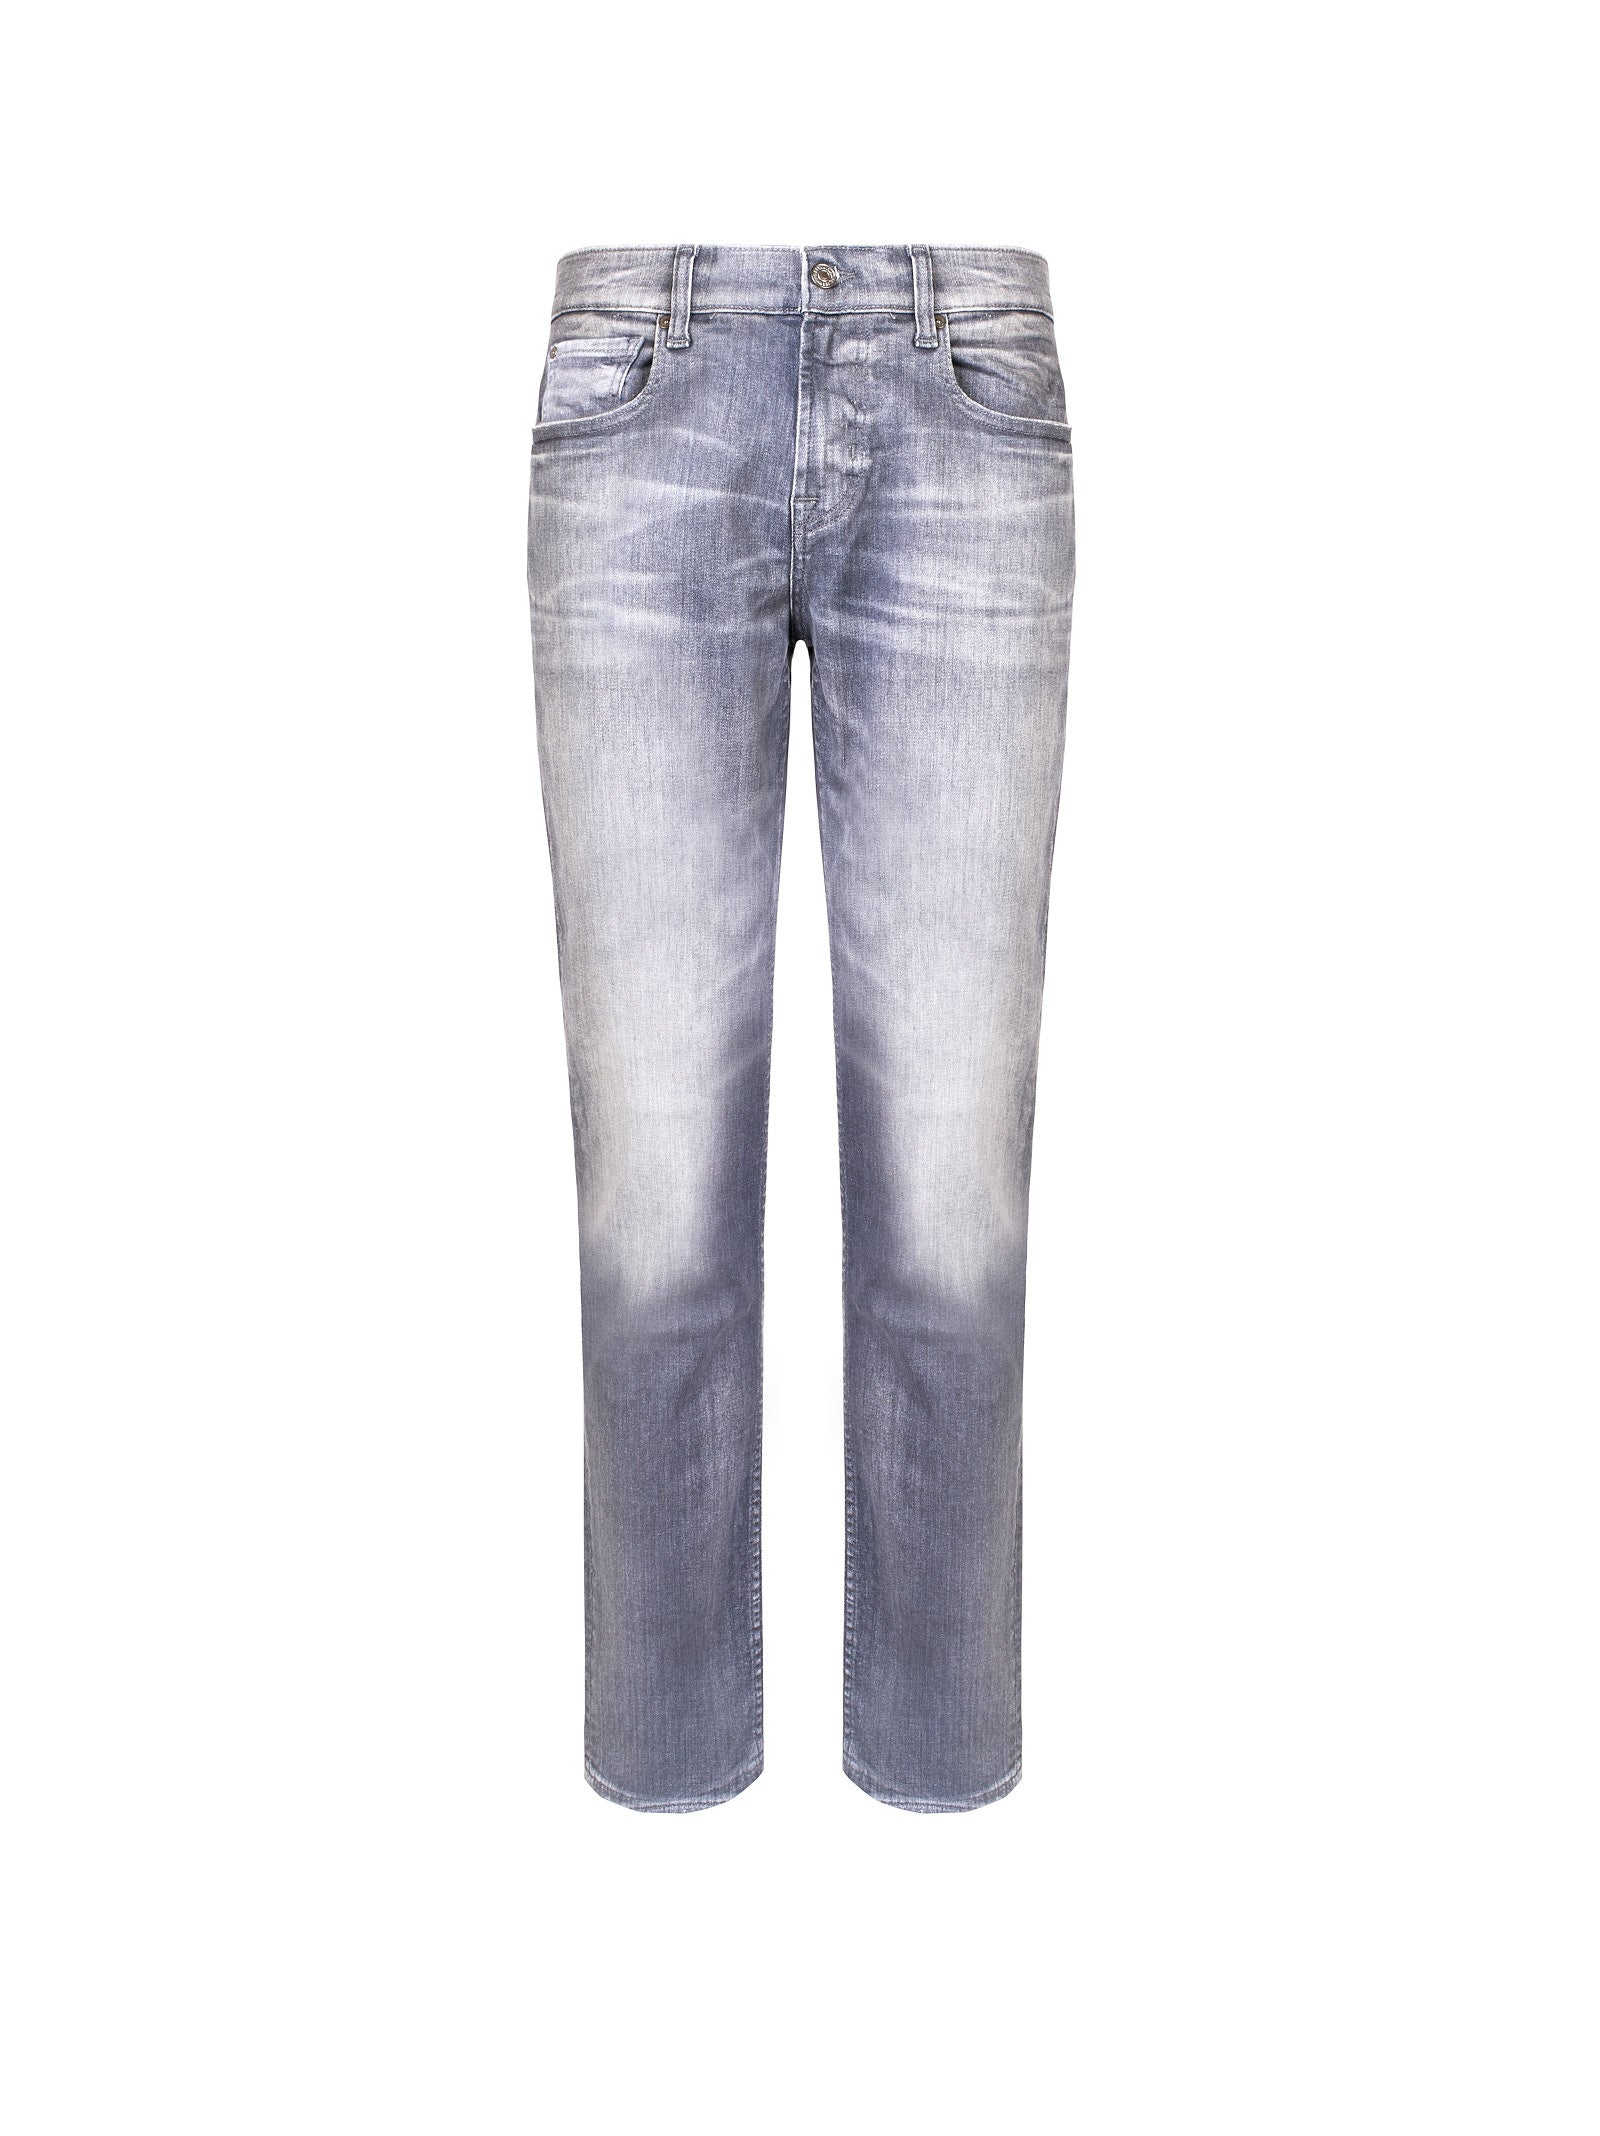 Jeans 7 FOR ALL MANKIND
Grigio